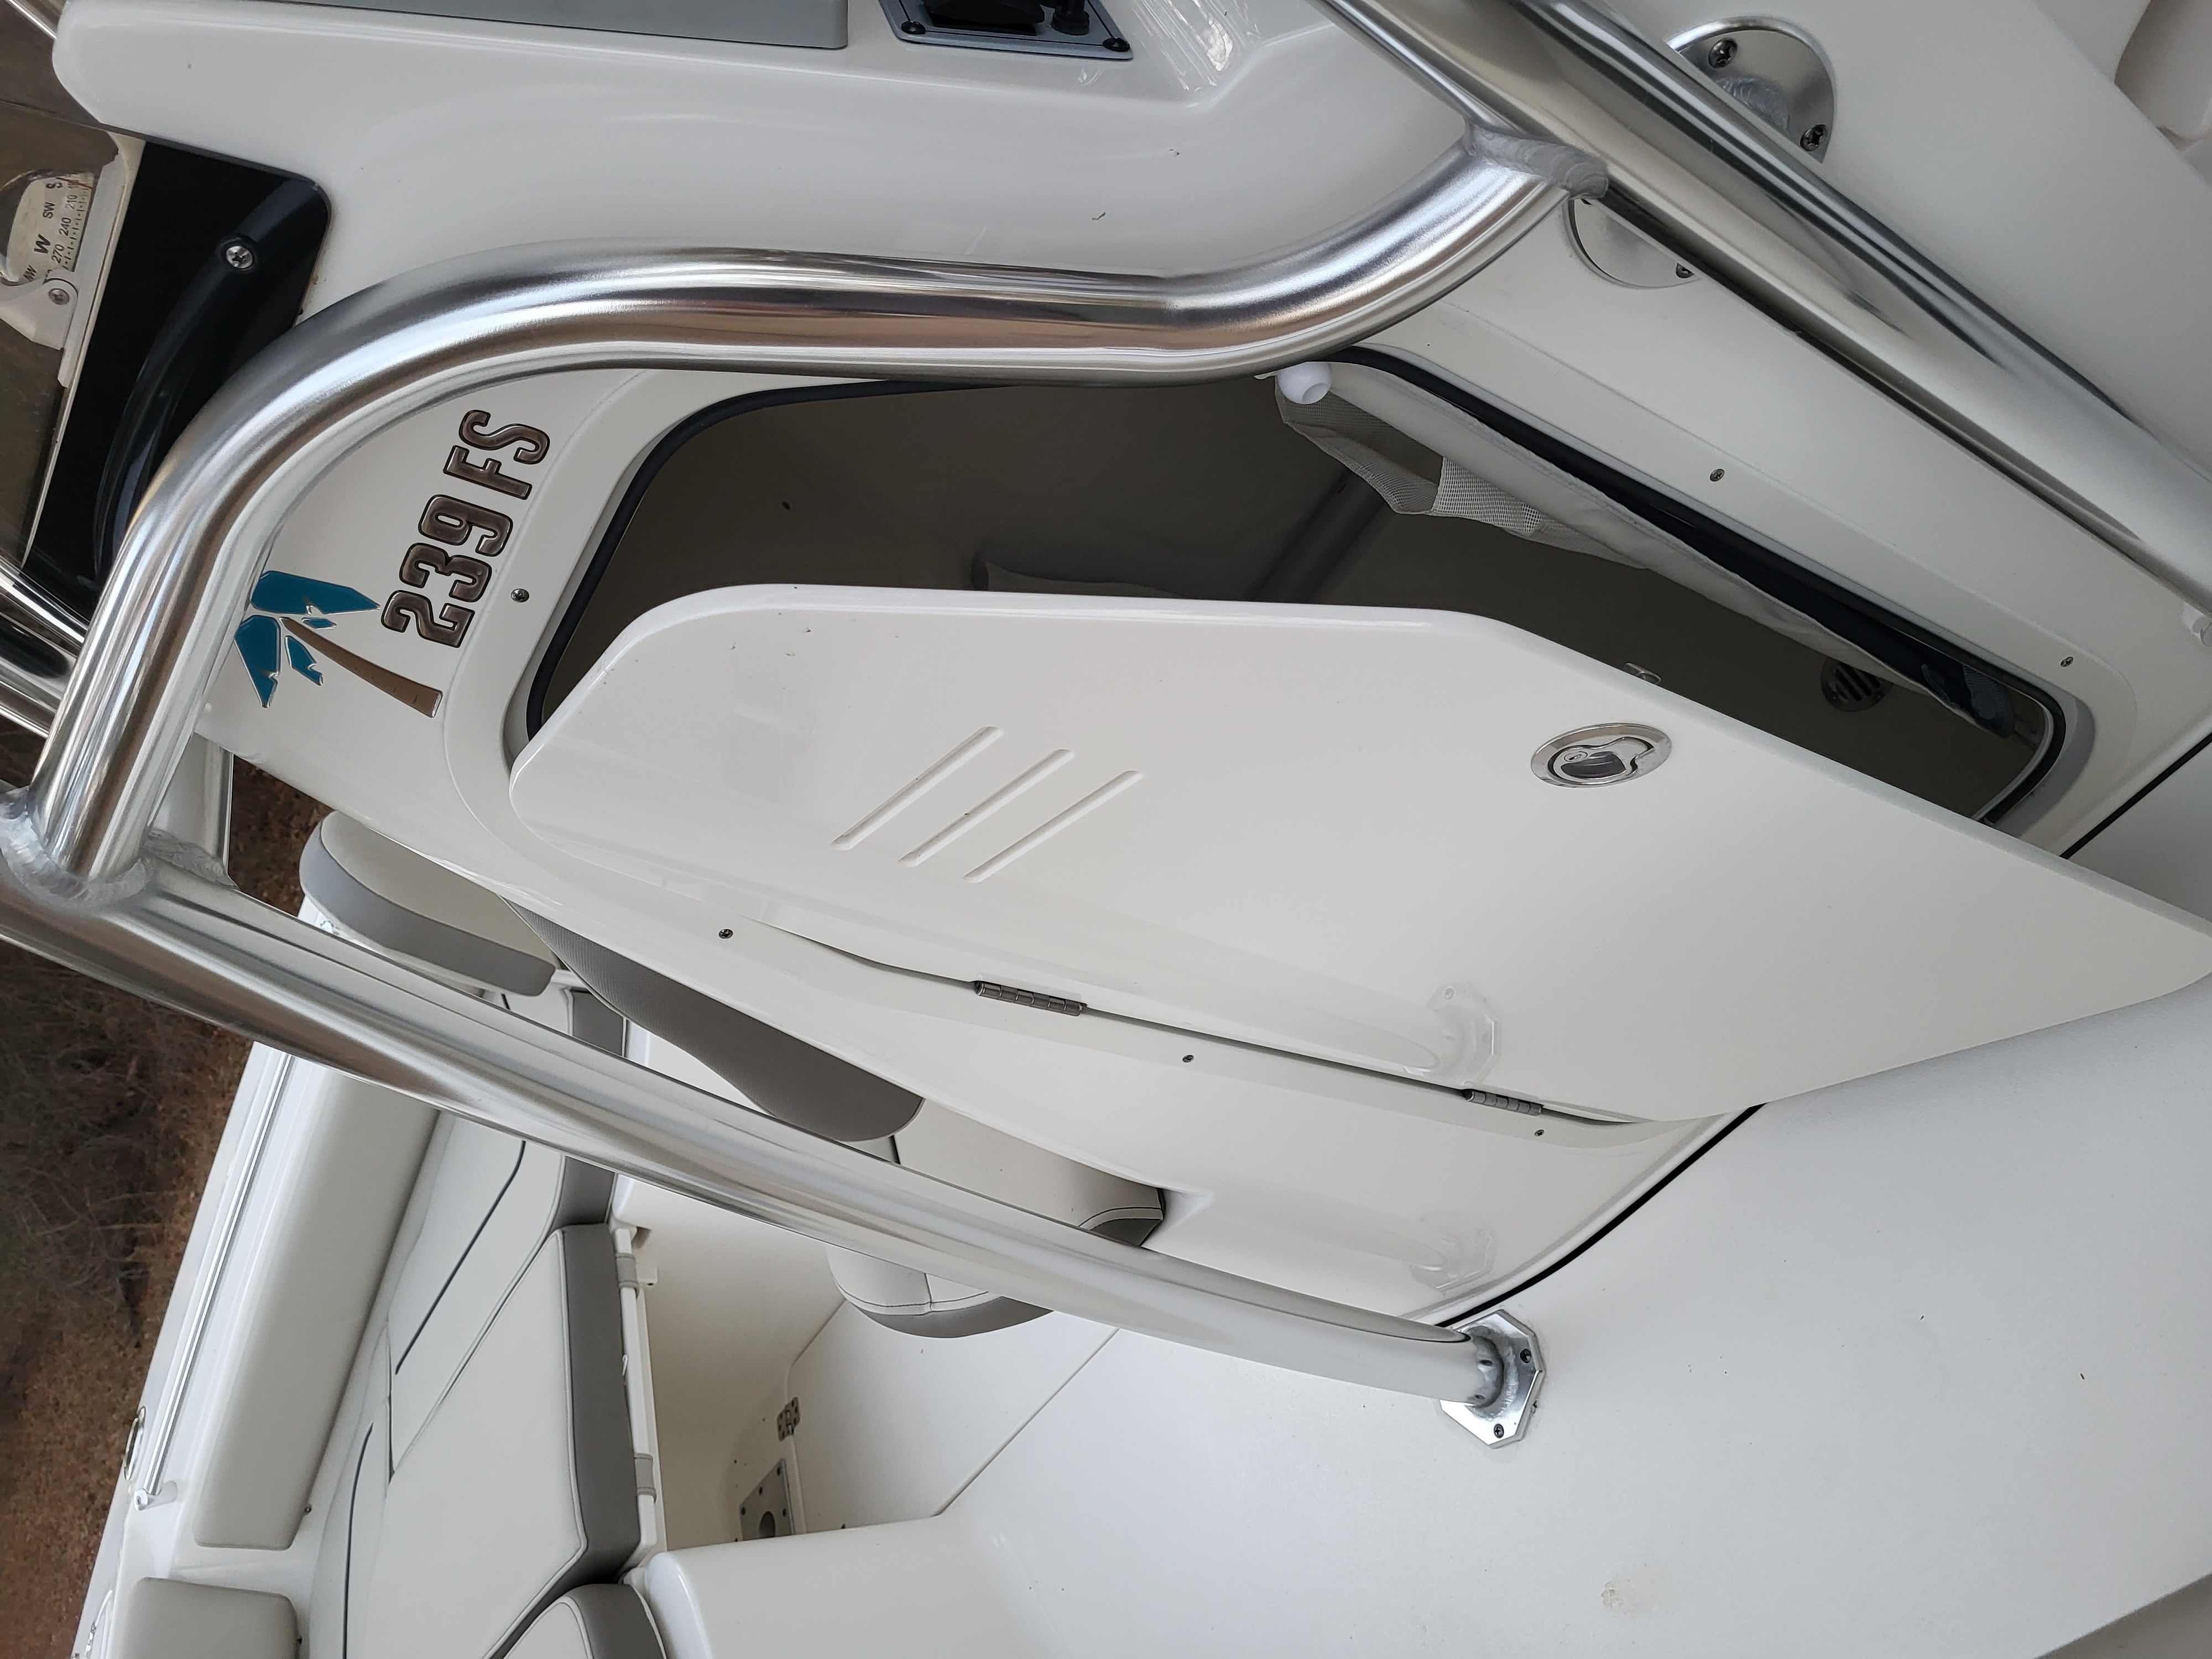 2022 Key West 239FS Power boat for sale in Laurinburg, NC - image 12 